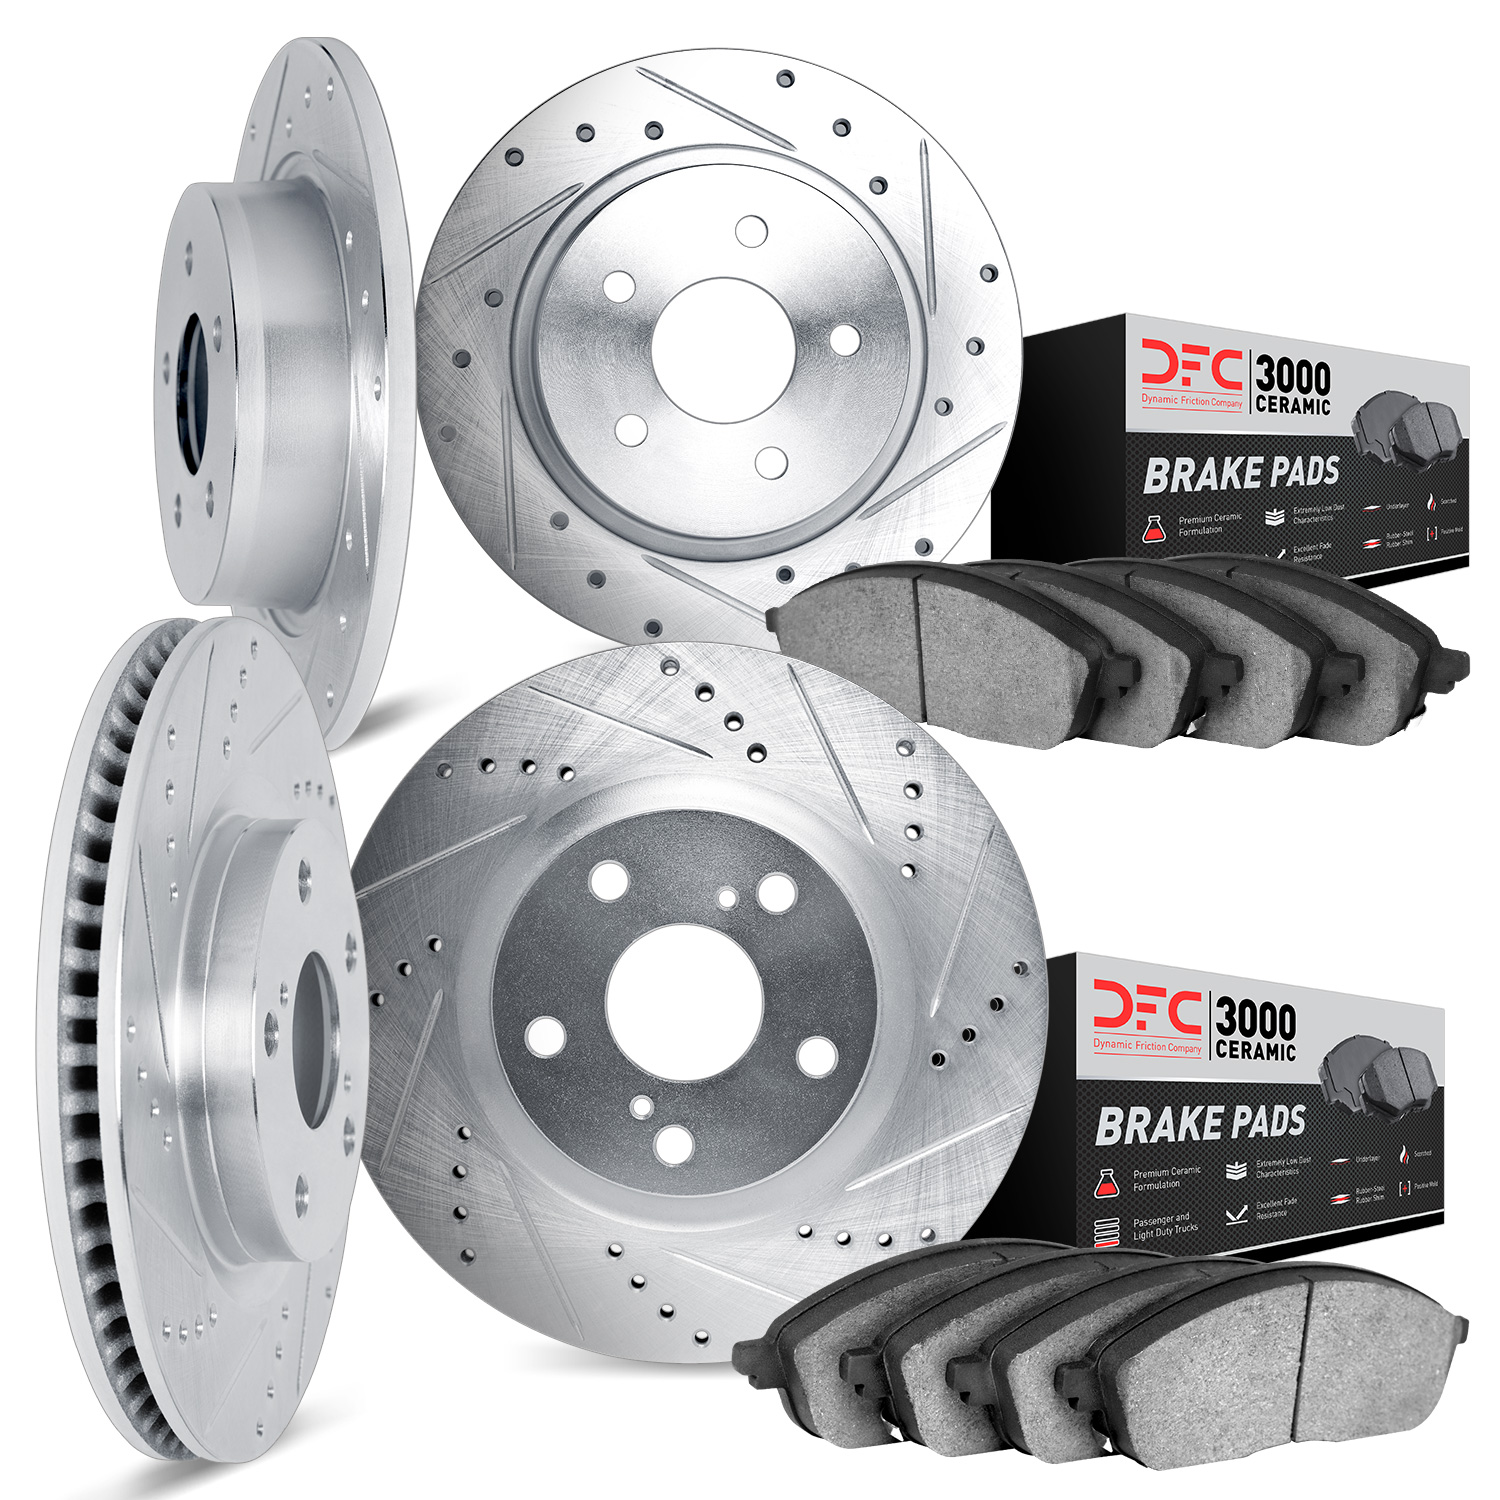 7304-01005 Drilled/Slotted Brake Rotor with 3000-Series Ceramic Brake Pads Kit [Silver], 2007-2014 Suzuki, Position: Front and R